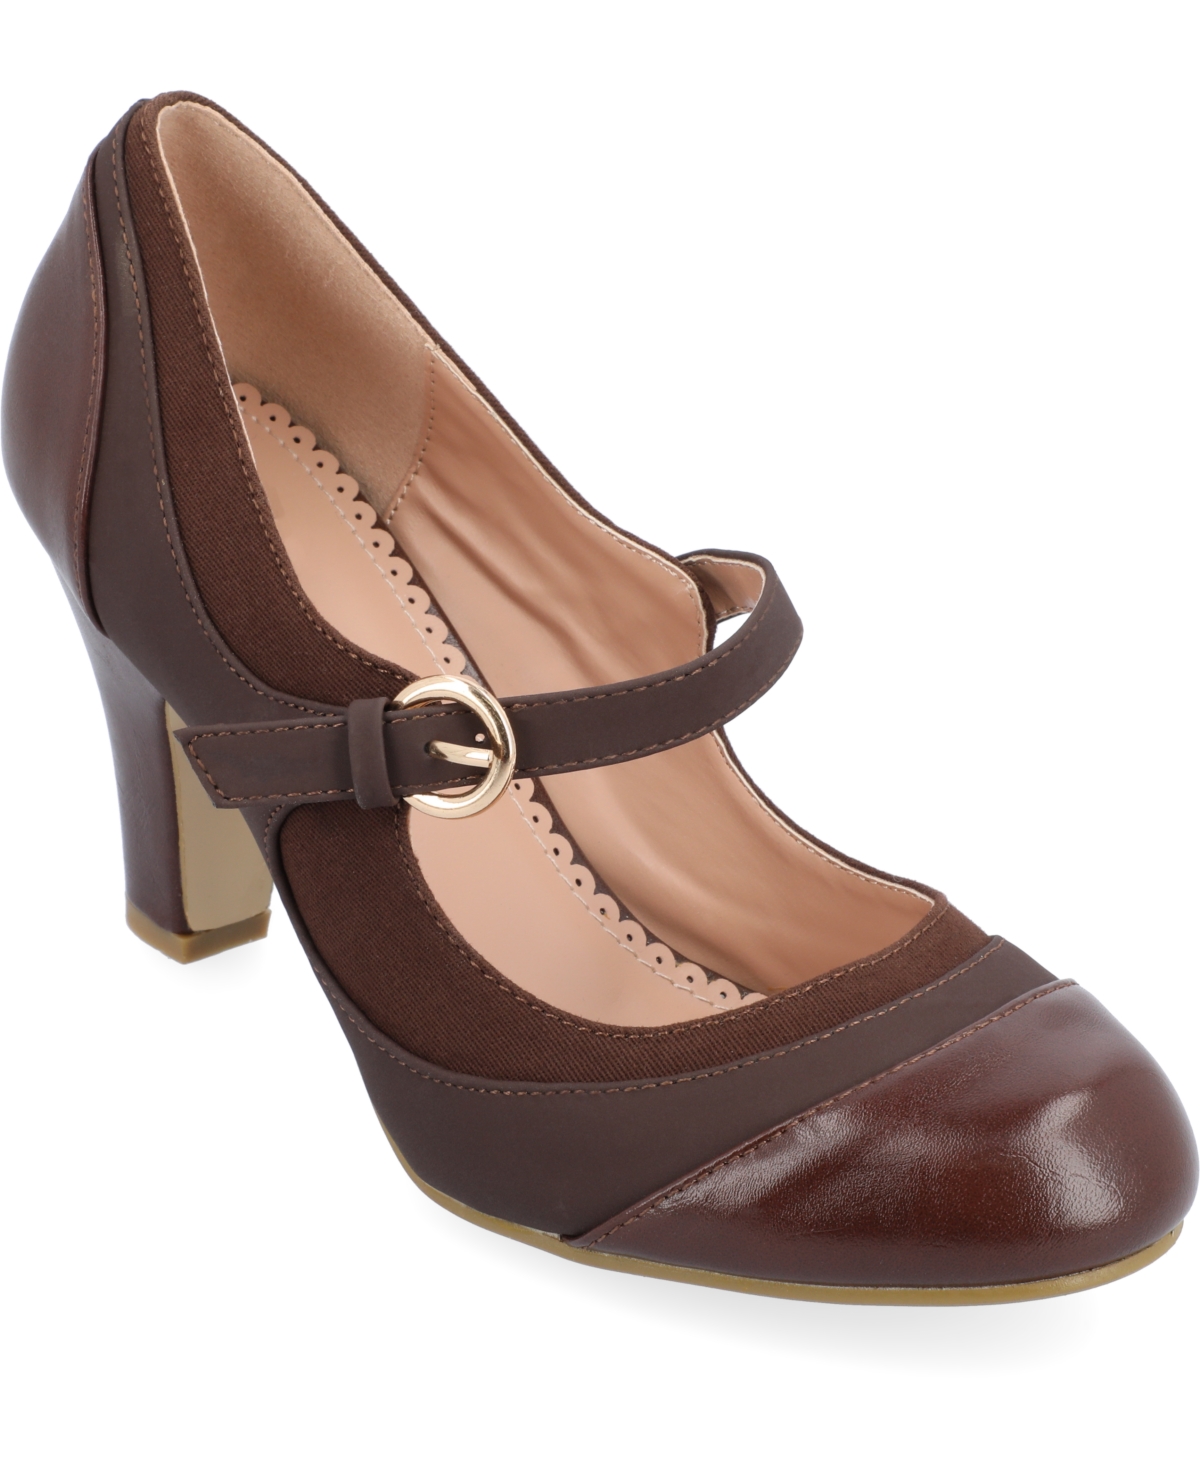 Vintage Shoes in Pictures | Shop Vintage Style Shoes Journee Collection Womens Siri Tweed Buckle Heels - Brown $42.74 AT vintagedancer.com